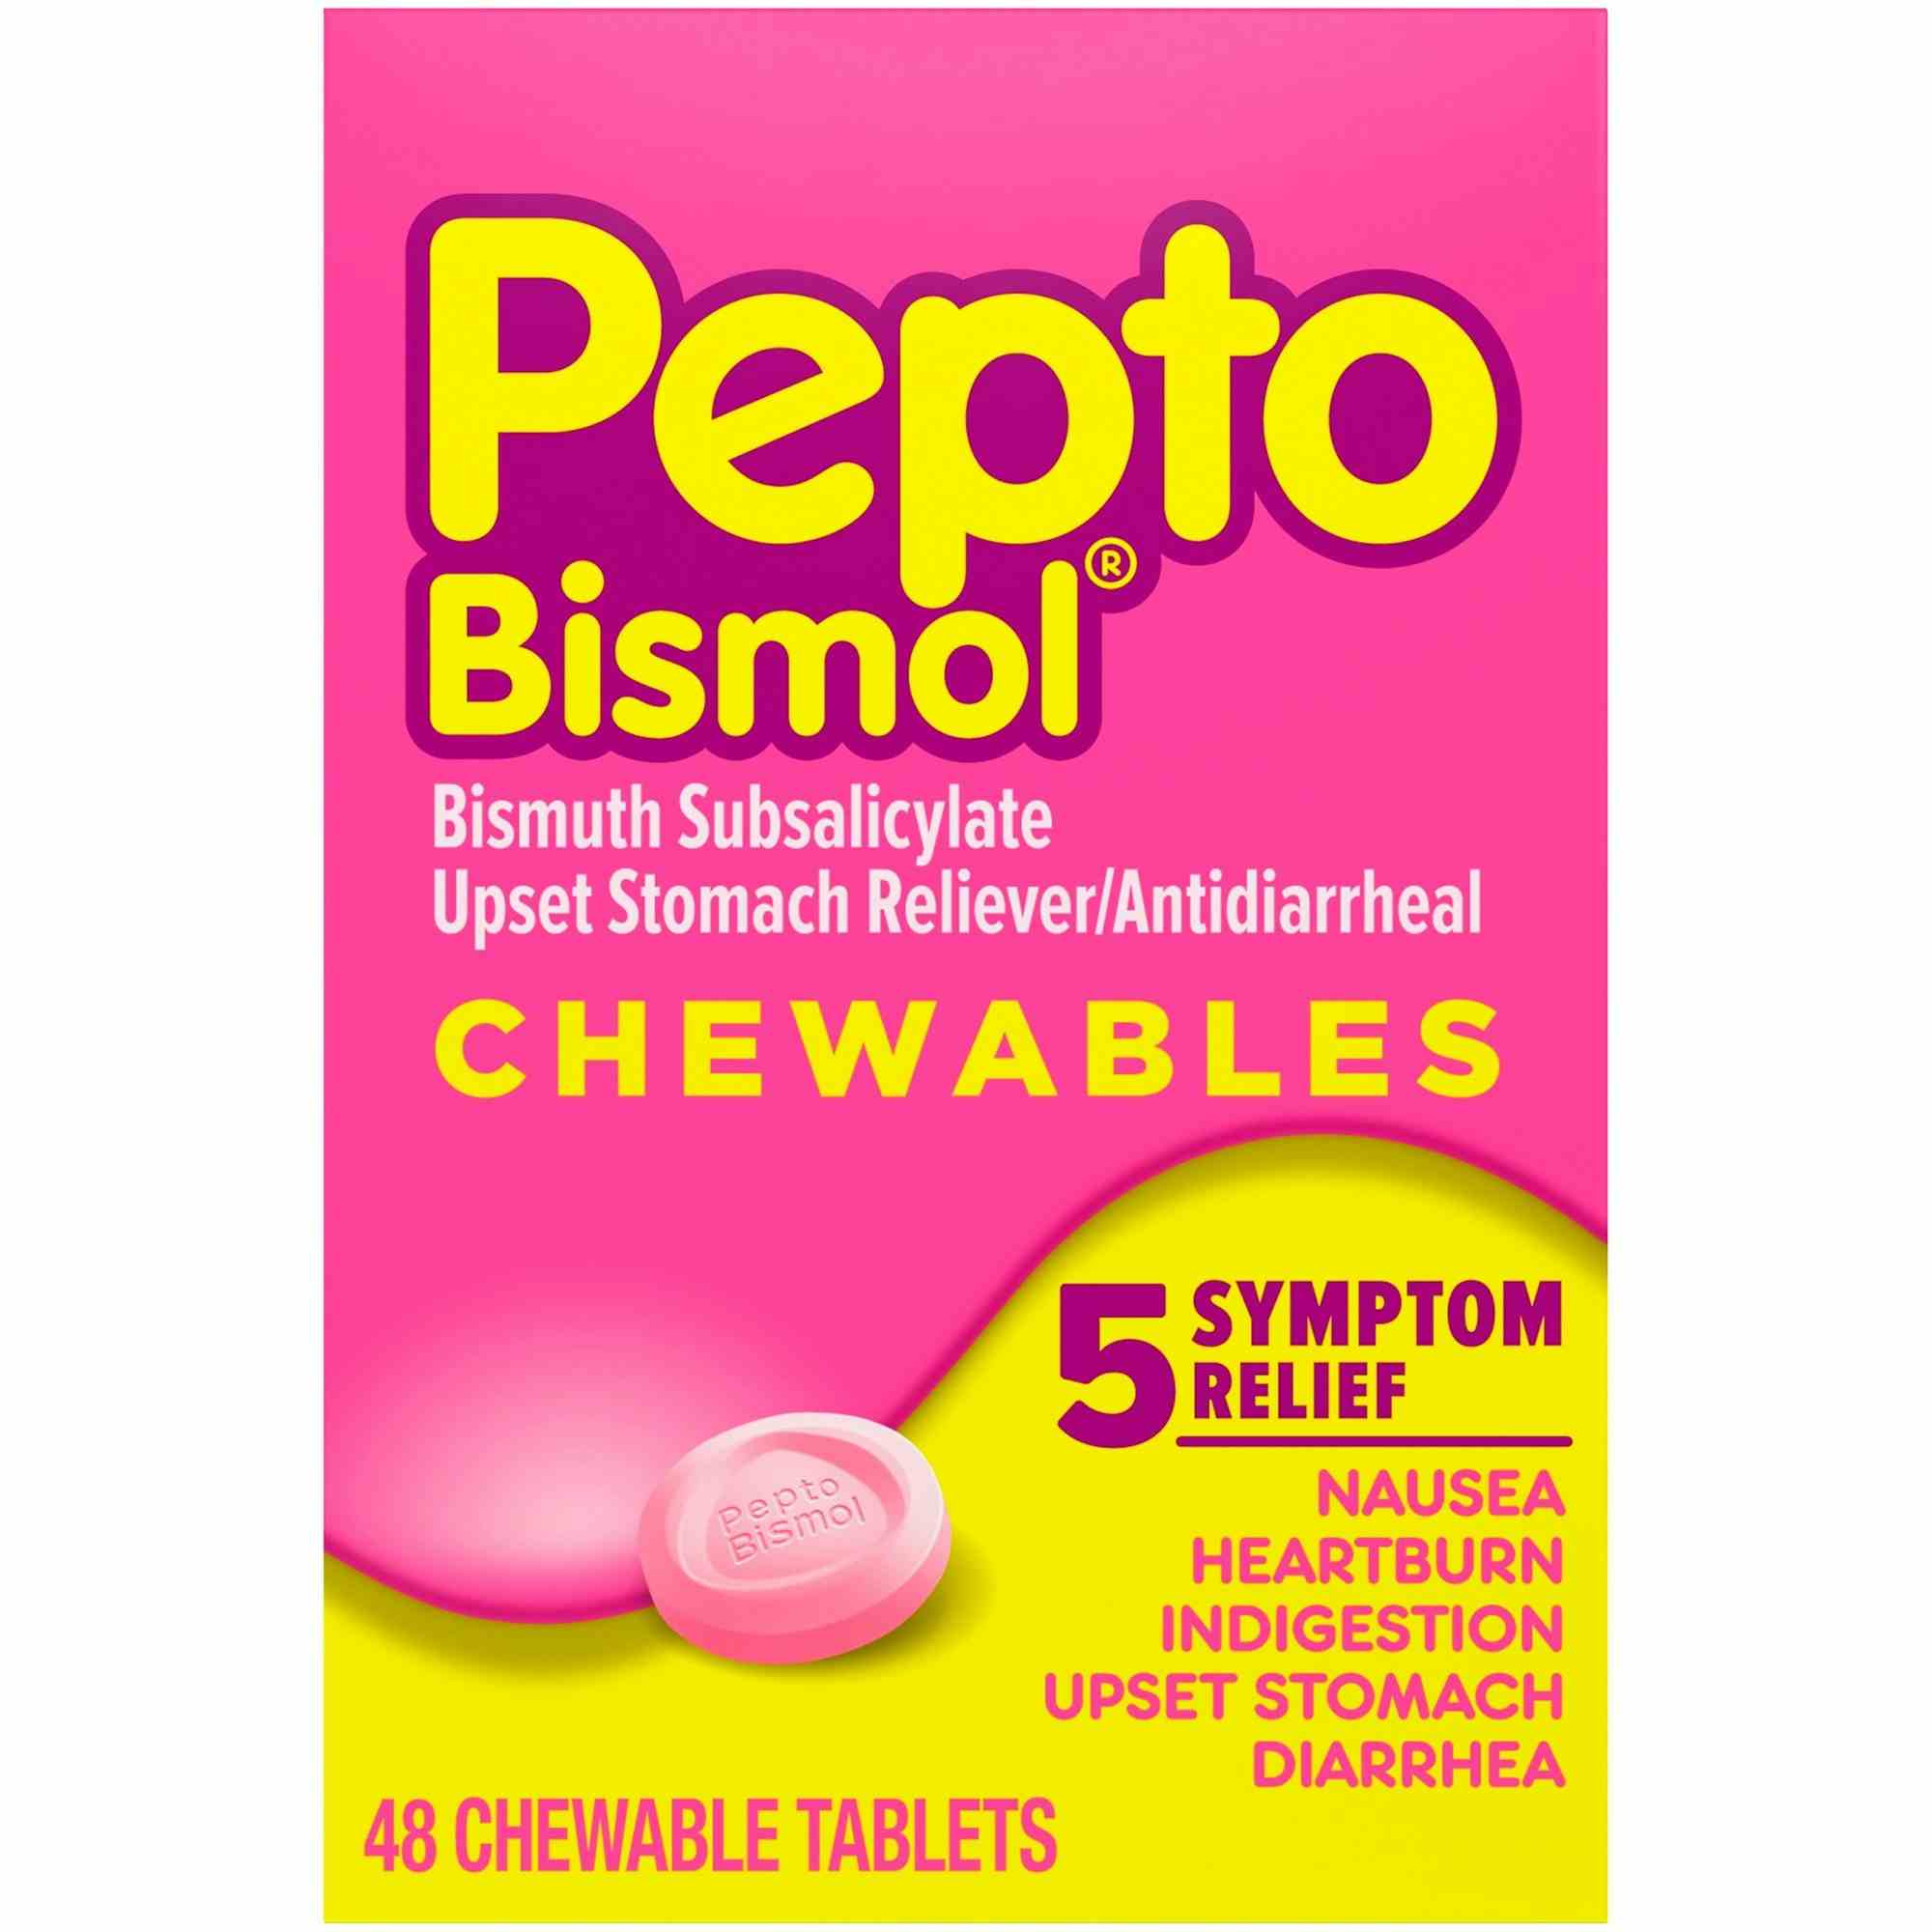 Pepto Bismol Upset Stomach Reliever/Anti-Diarrheal Chewables, 262 mg, 37000047710, Box of 48